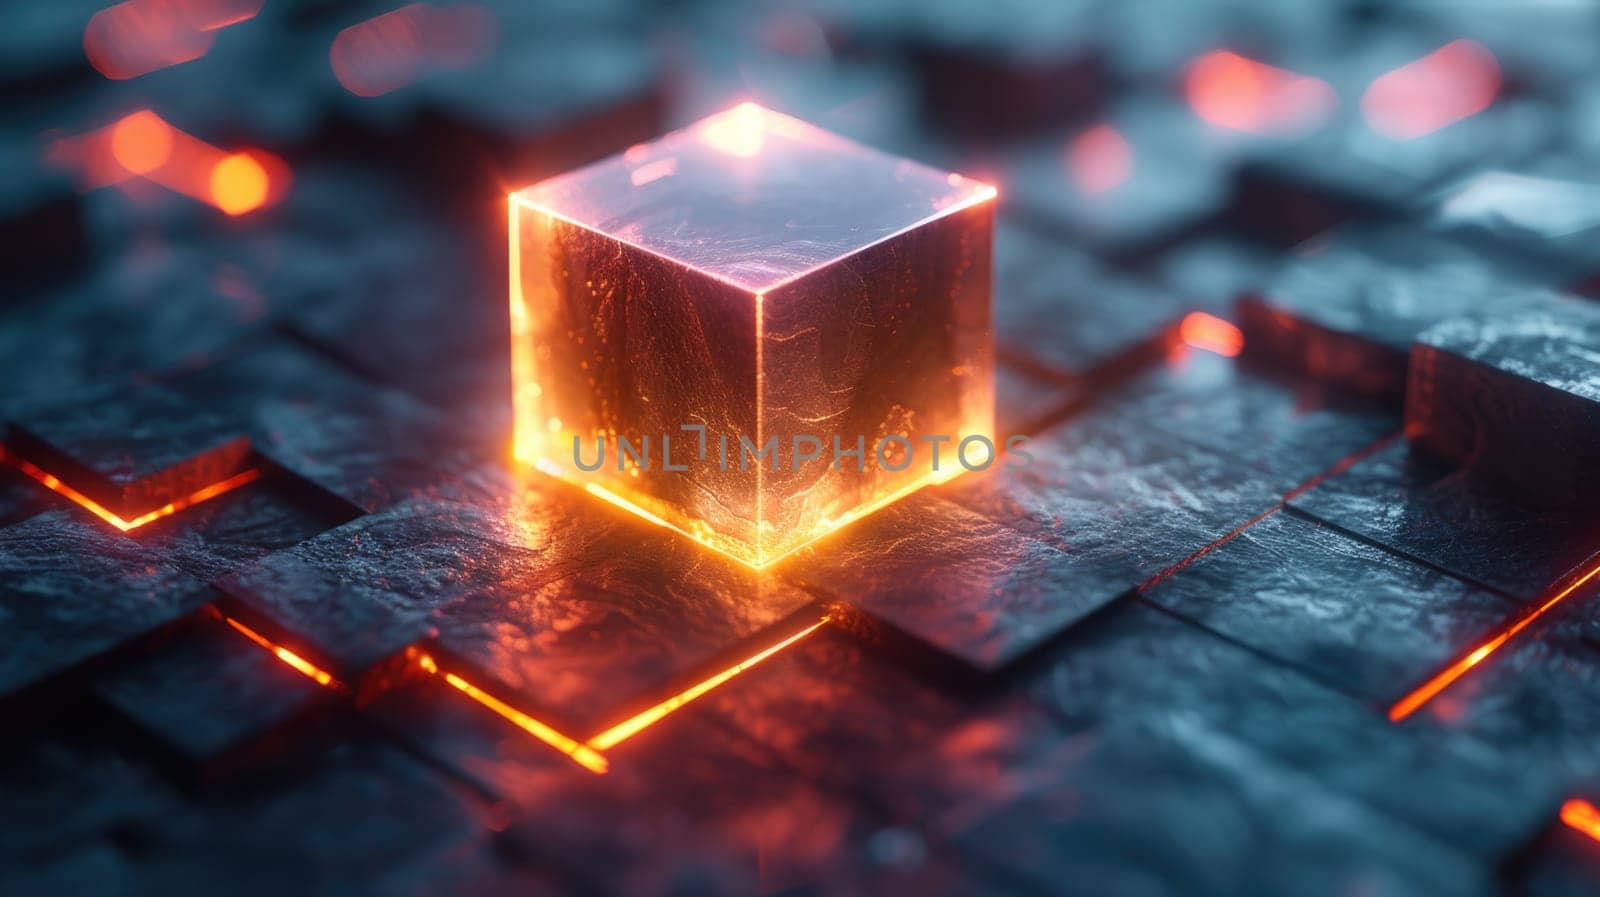 A photograph capturing a glowing cube placed on top of a computer keyboard.